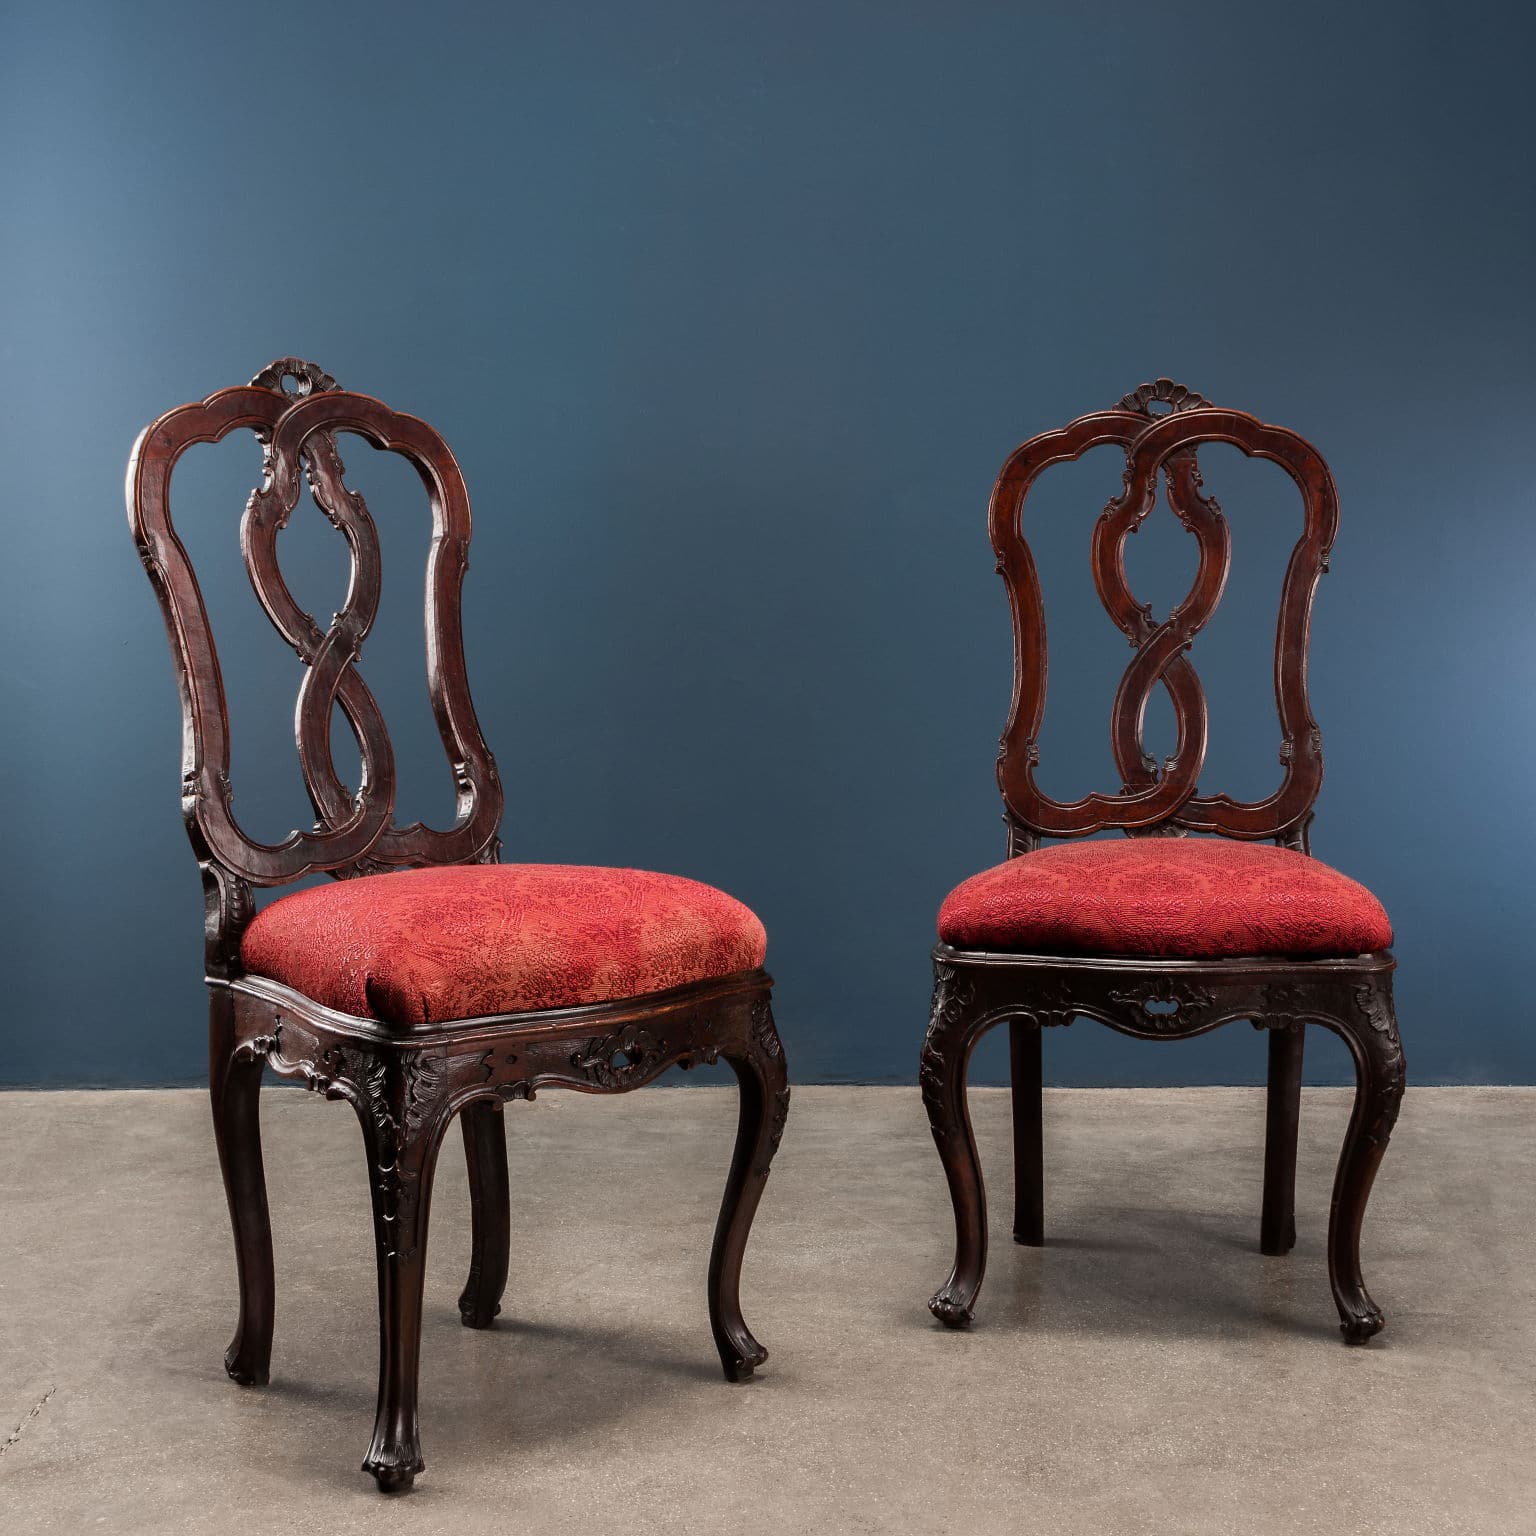 Pair of baroque chairs, Venice